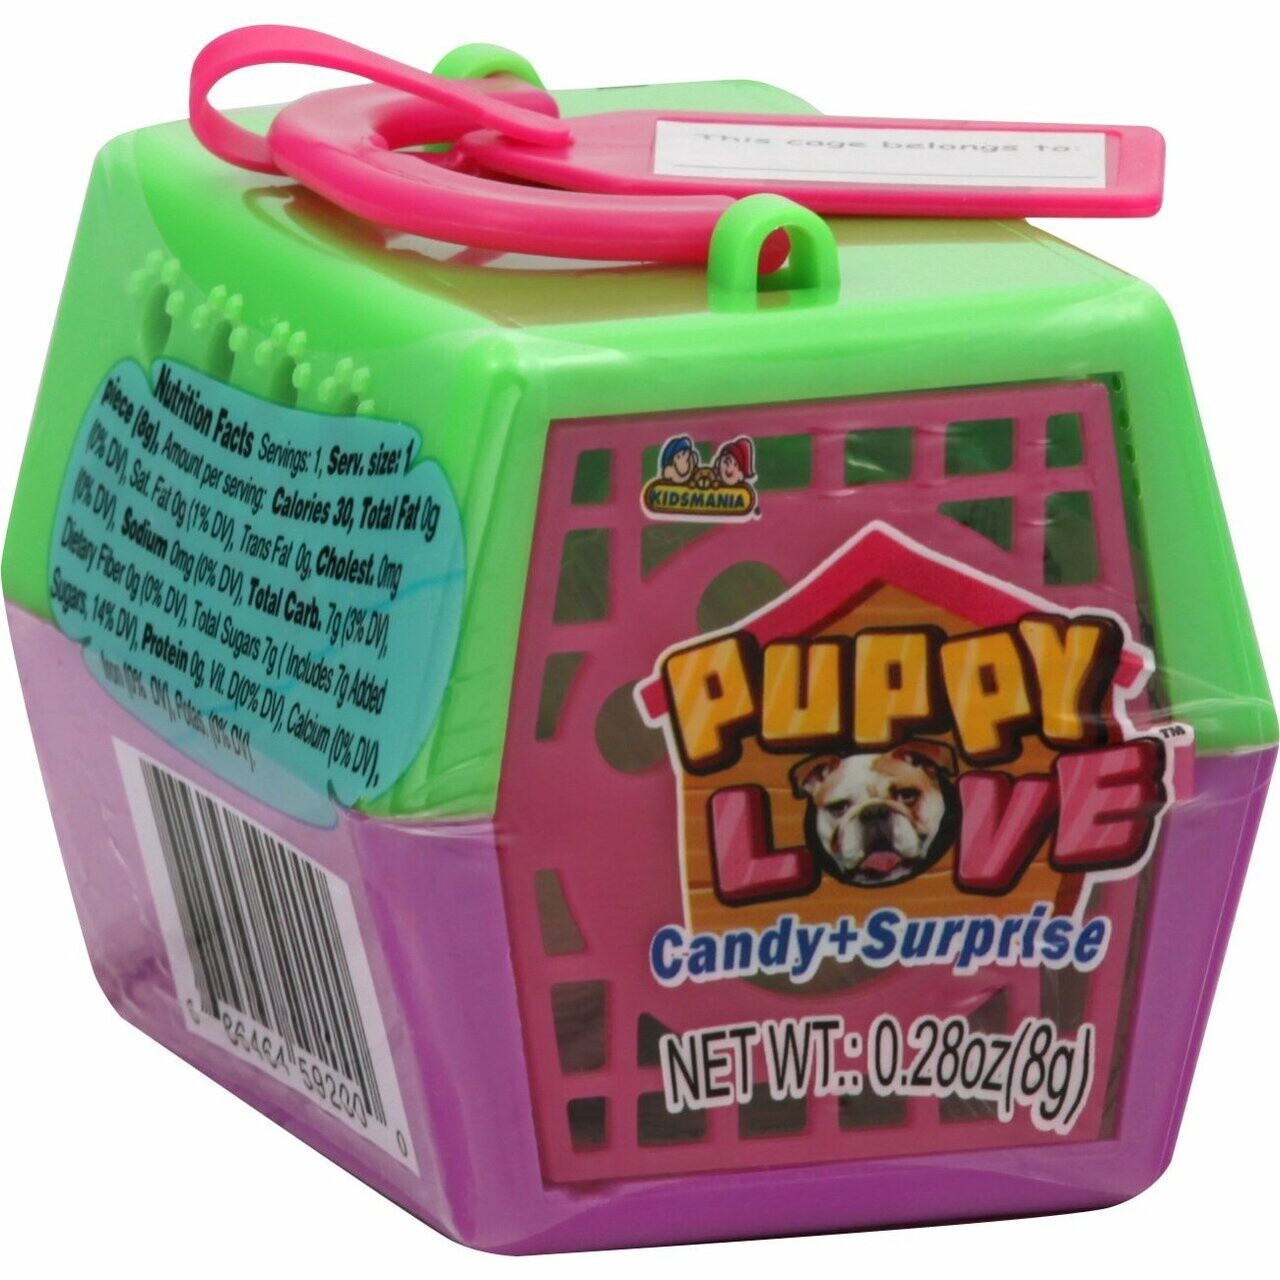 Puppy Love Candy Surprise 8g